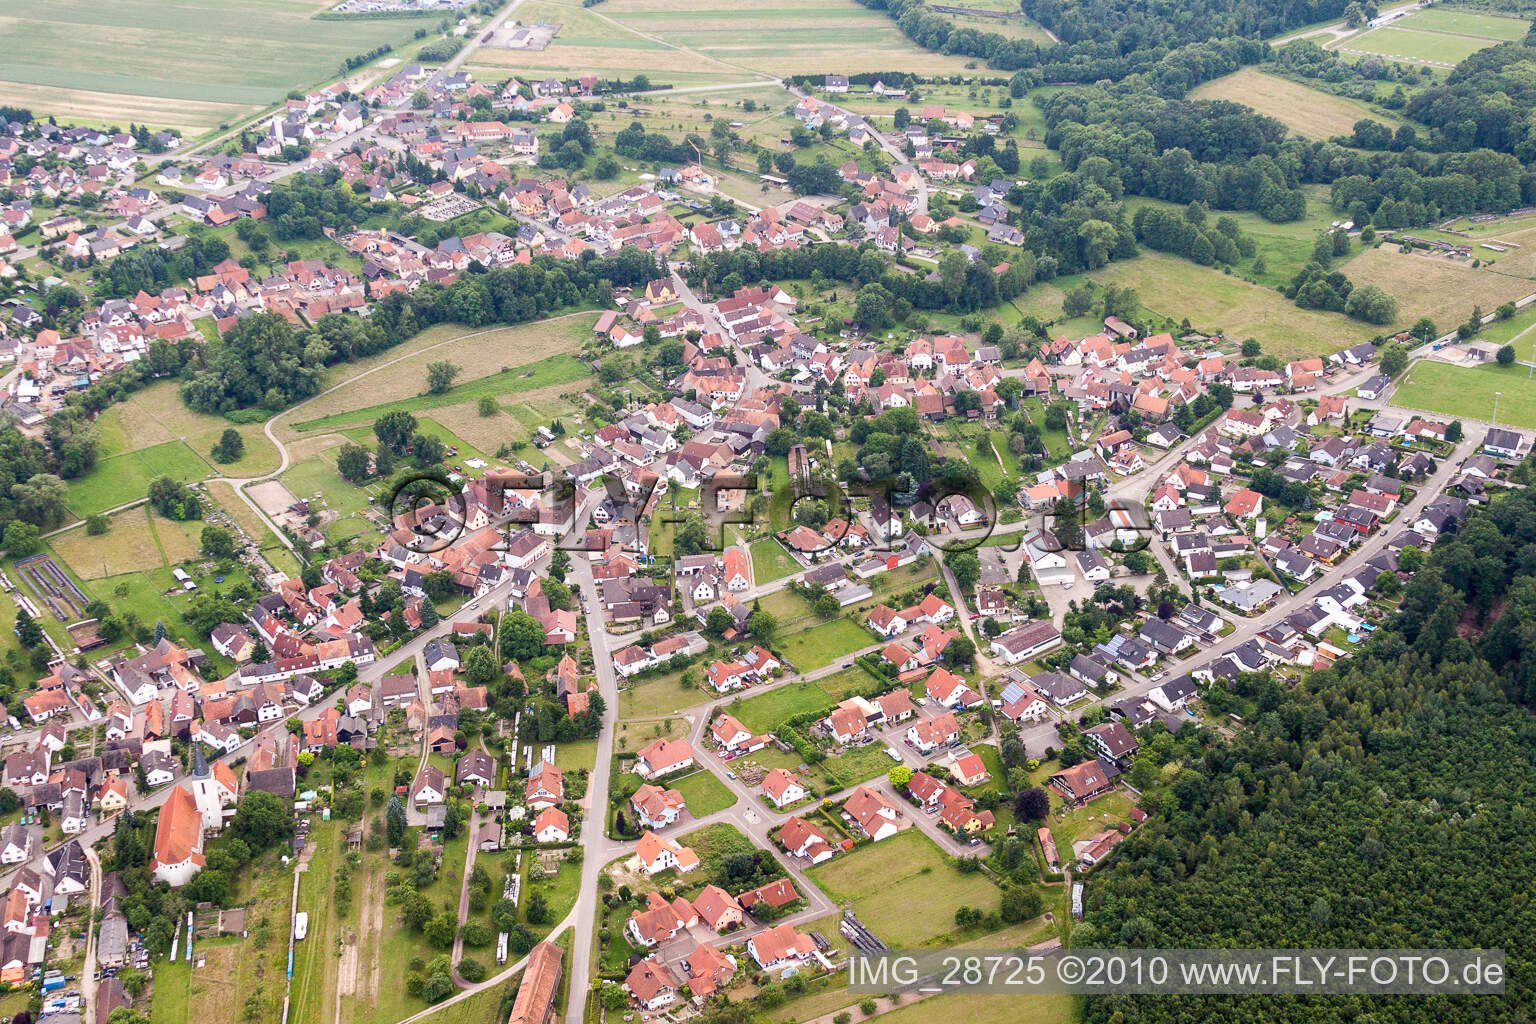 Aerial view of Village - view on the edge of agricultural fields and farmland in Scheibenhardt in the state Rhineland-Palatinate, Germany